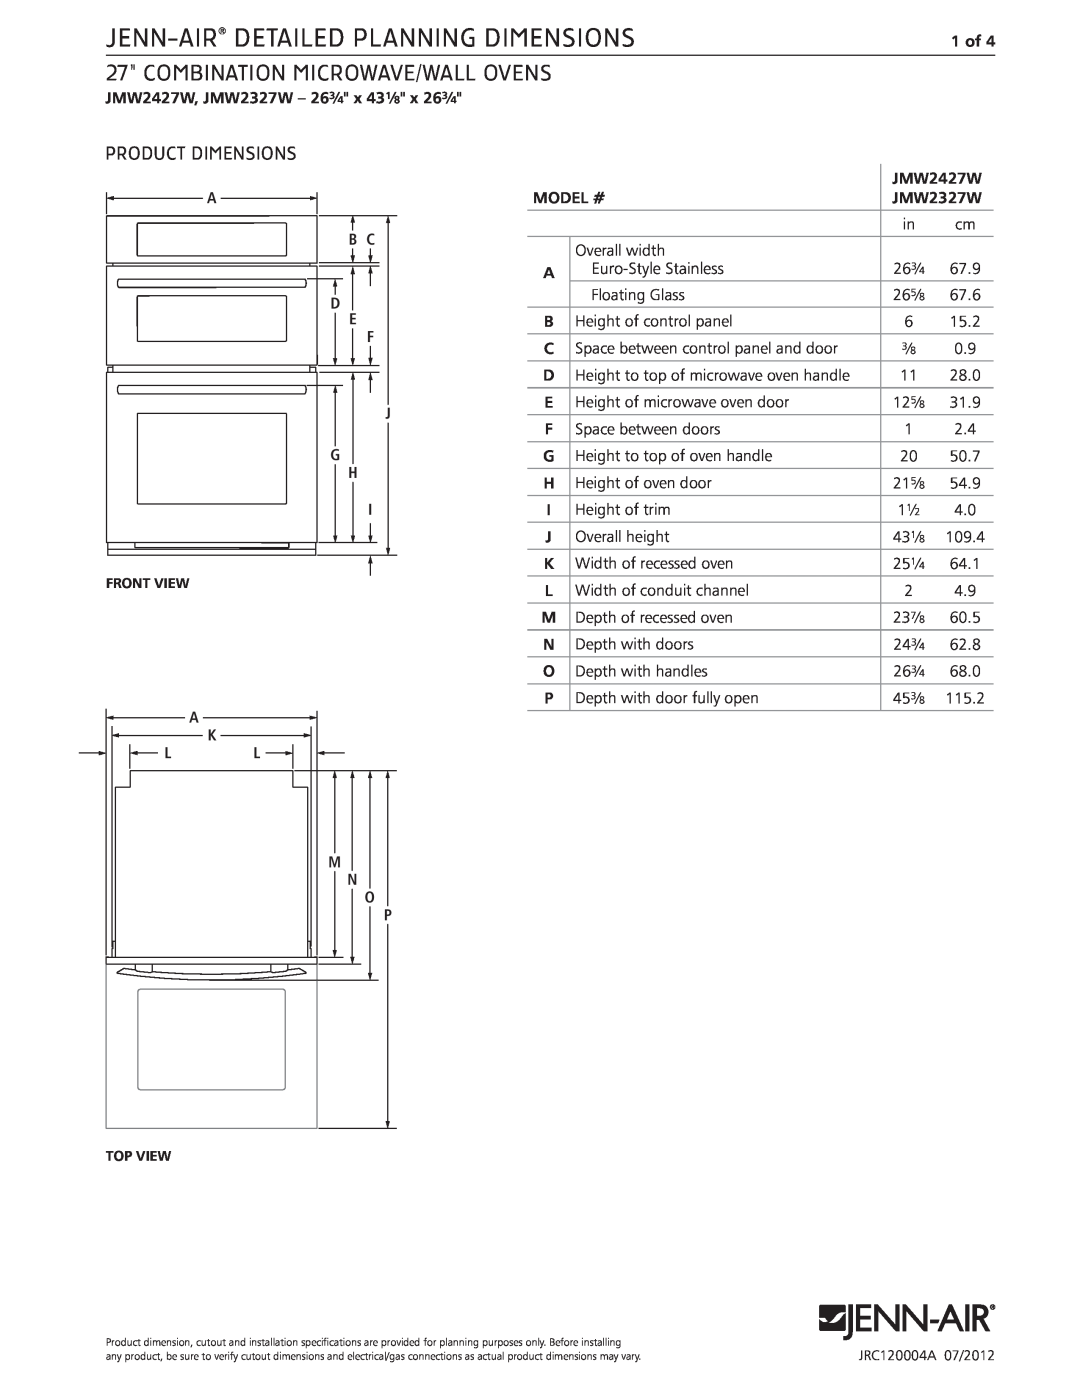 Jenn-Air JMW2327W dimensions Jenn-Air Detailed Planning Dimensions, combination microwave/wall ovens, Product Dimensions 